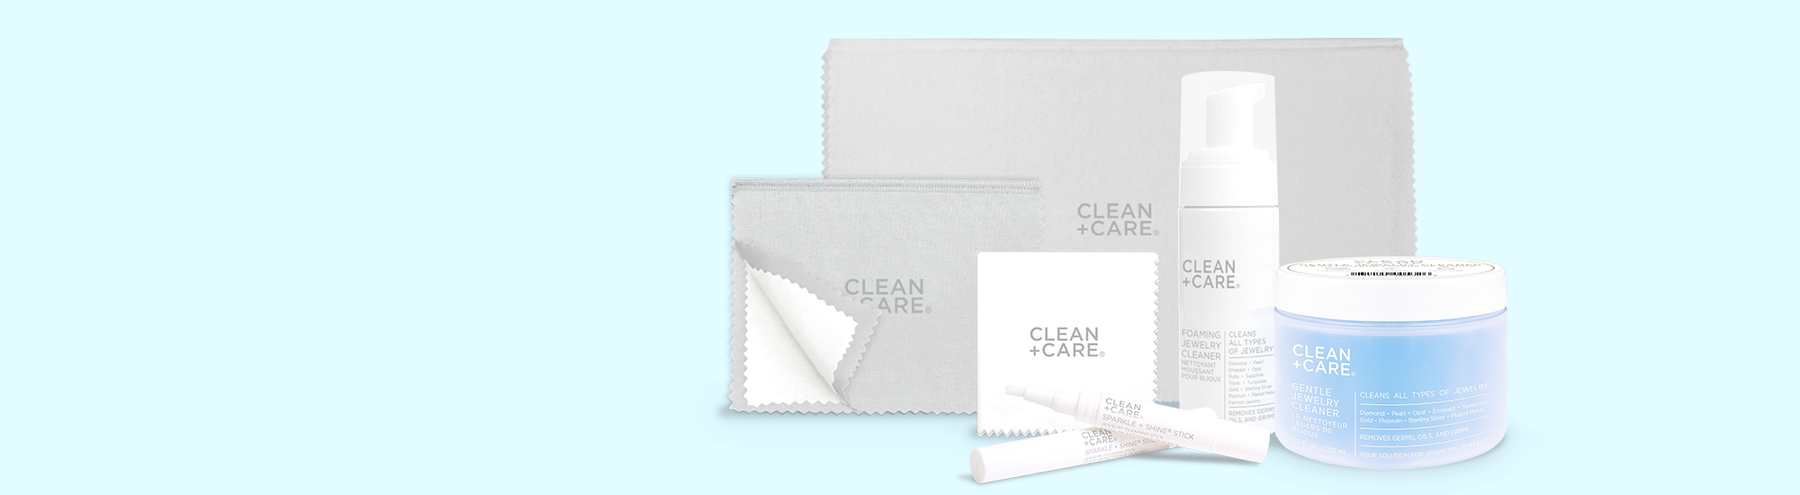 Clean and care offers a wide range of products for wholesale